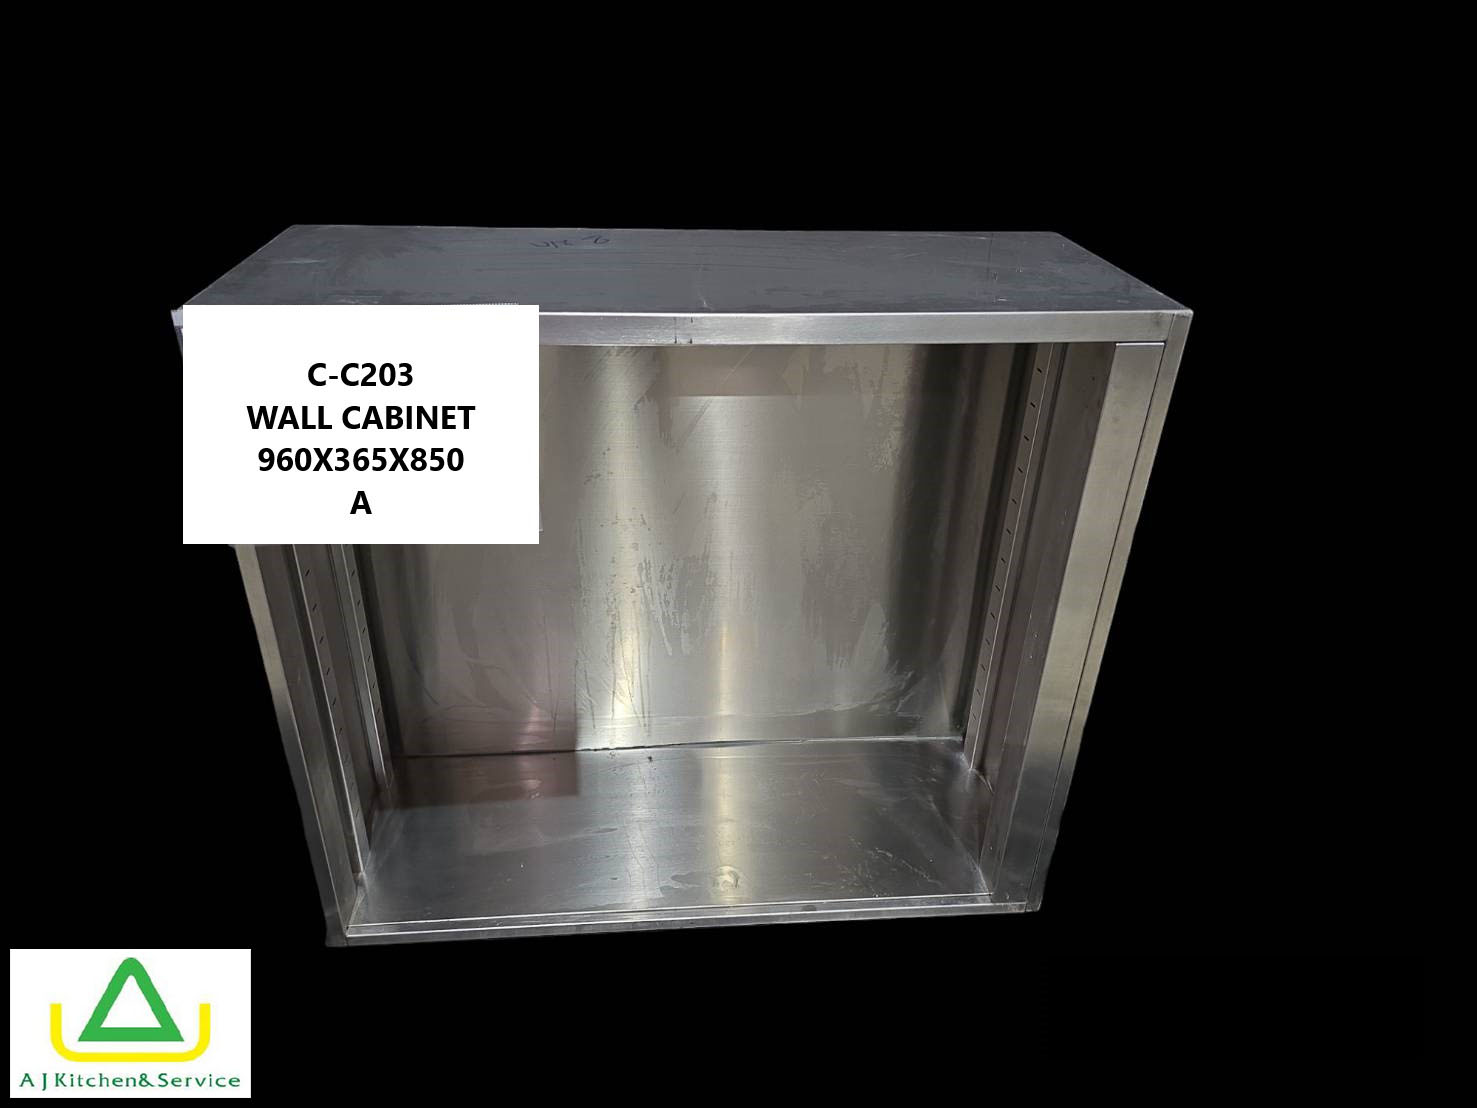 C-C203 WALL CABINET